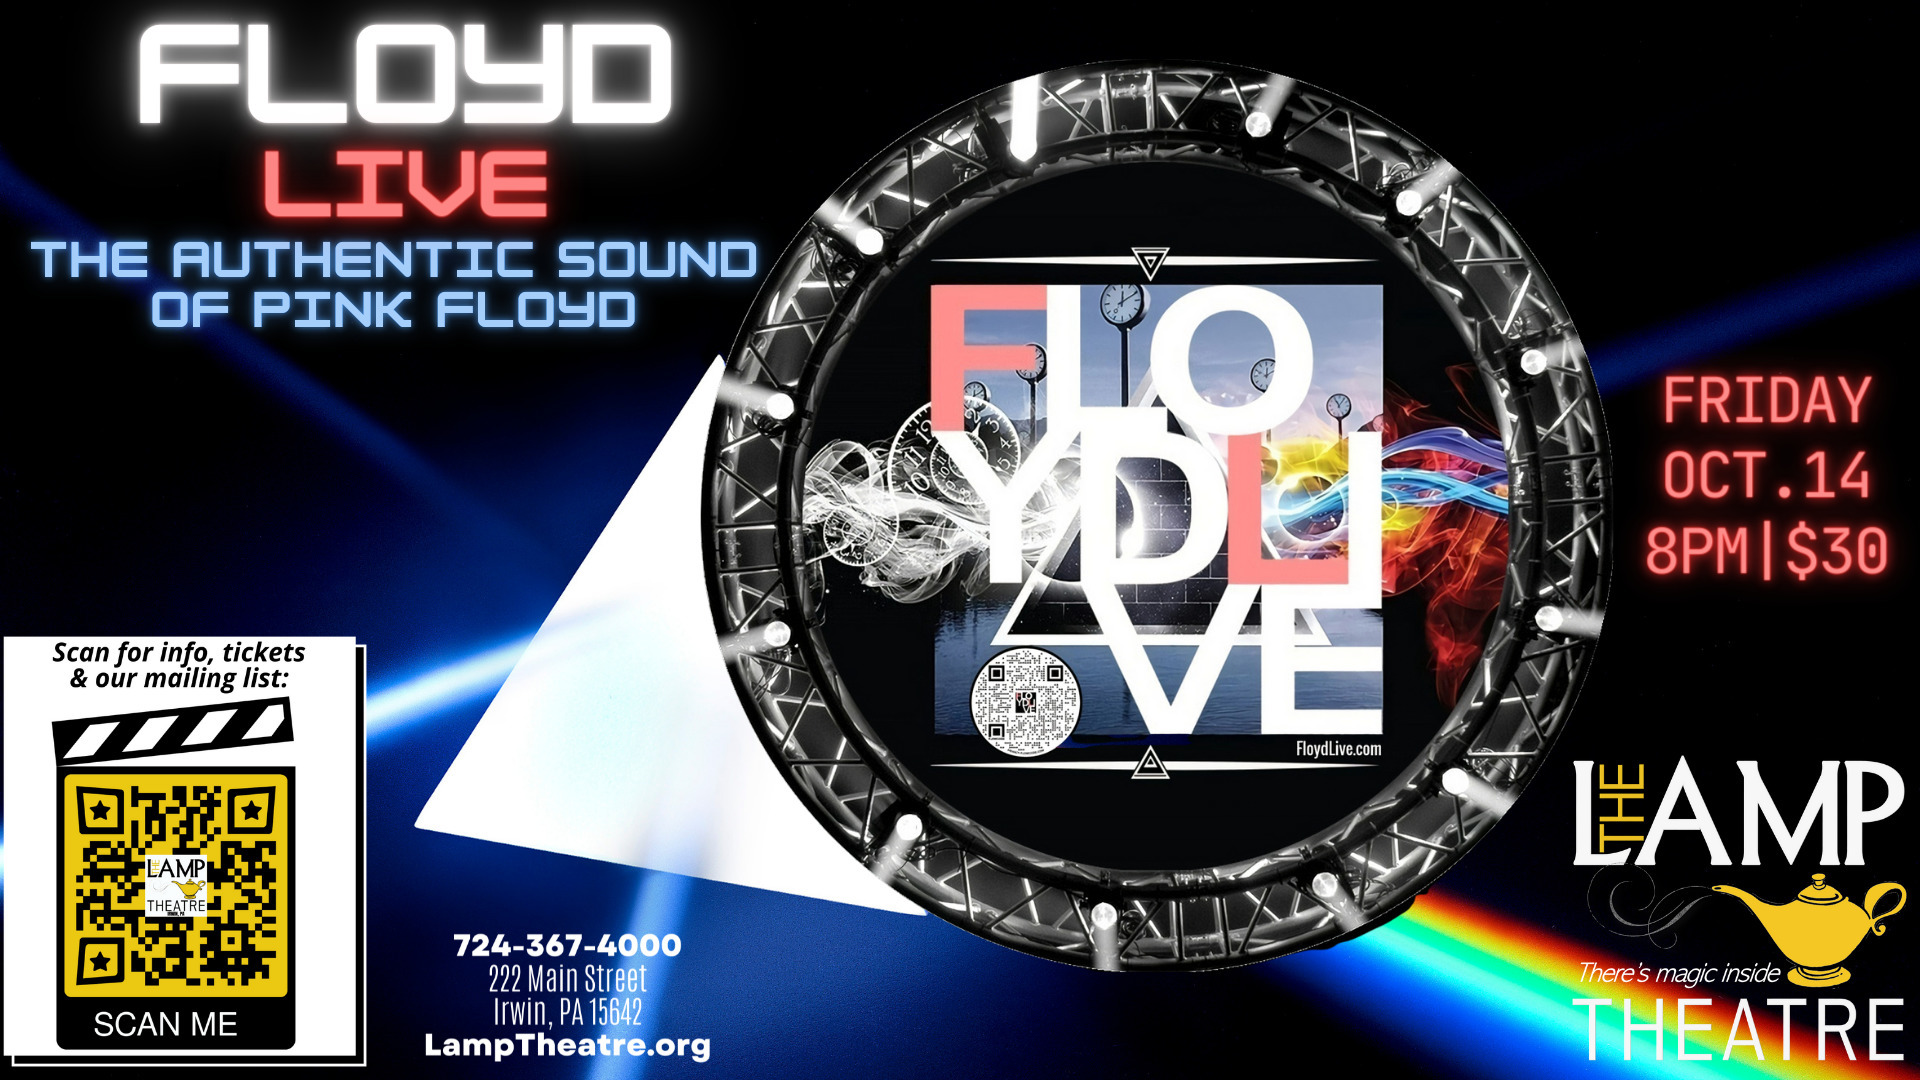 Floyd Live -The Authentic Sound of PINK FLOYD, Irwin, Pennsylvania, United States